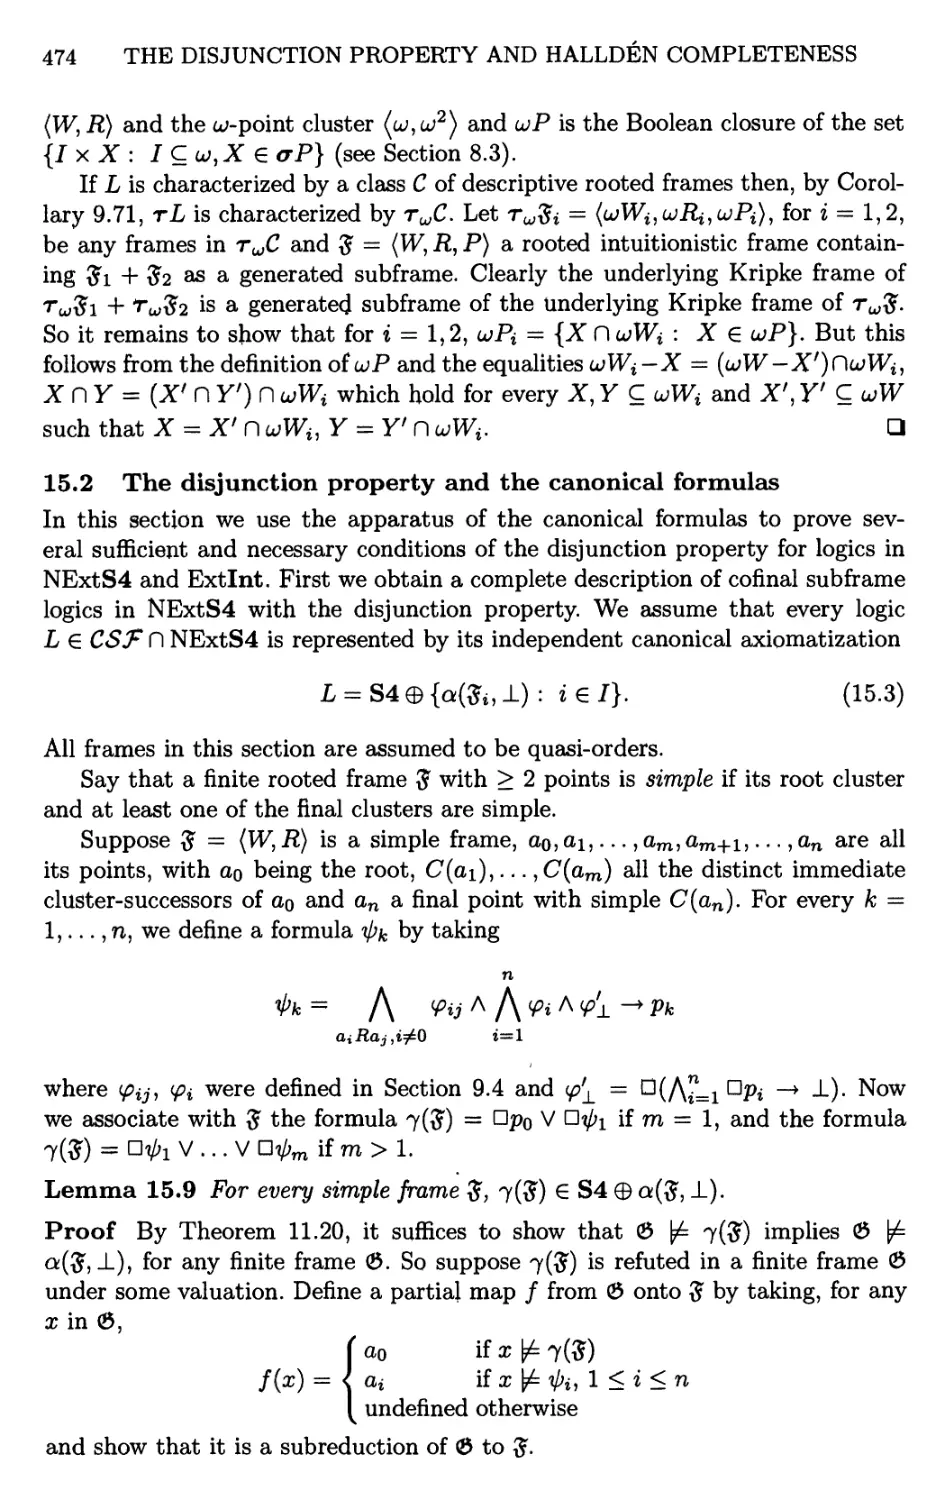 15.2 The disjunction property and the canonical formulas